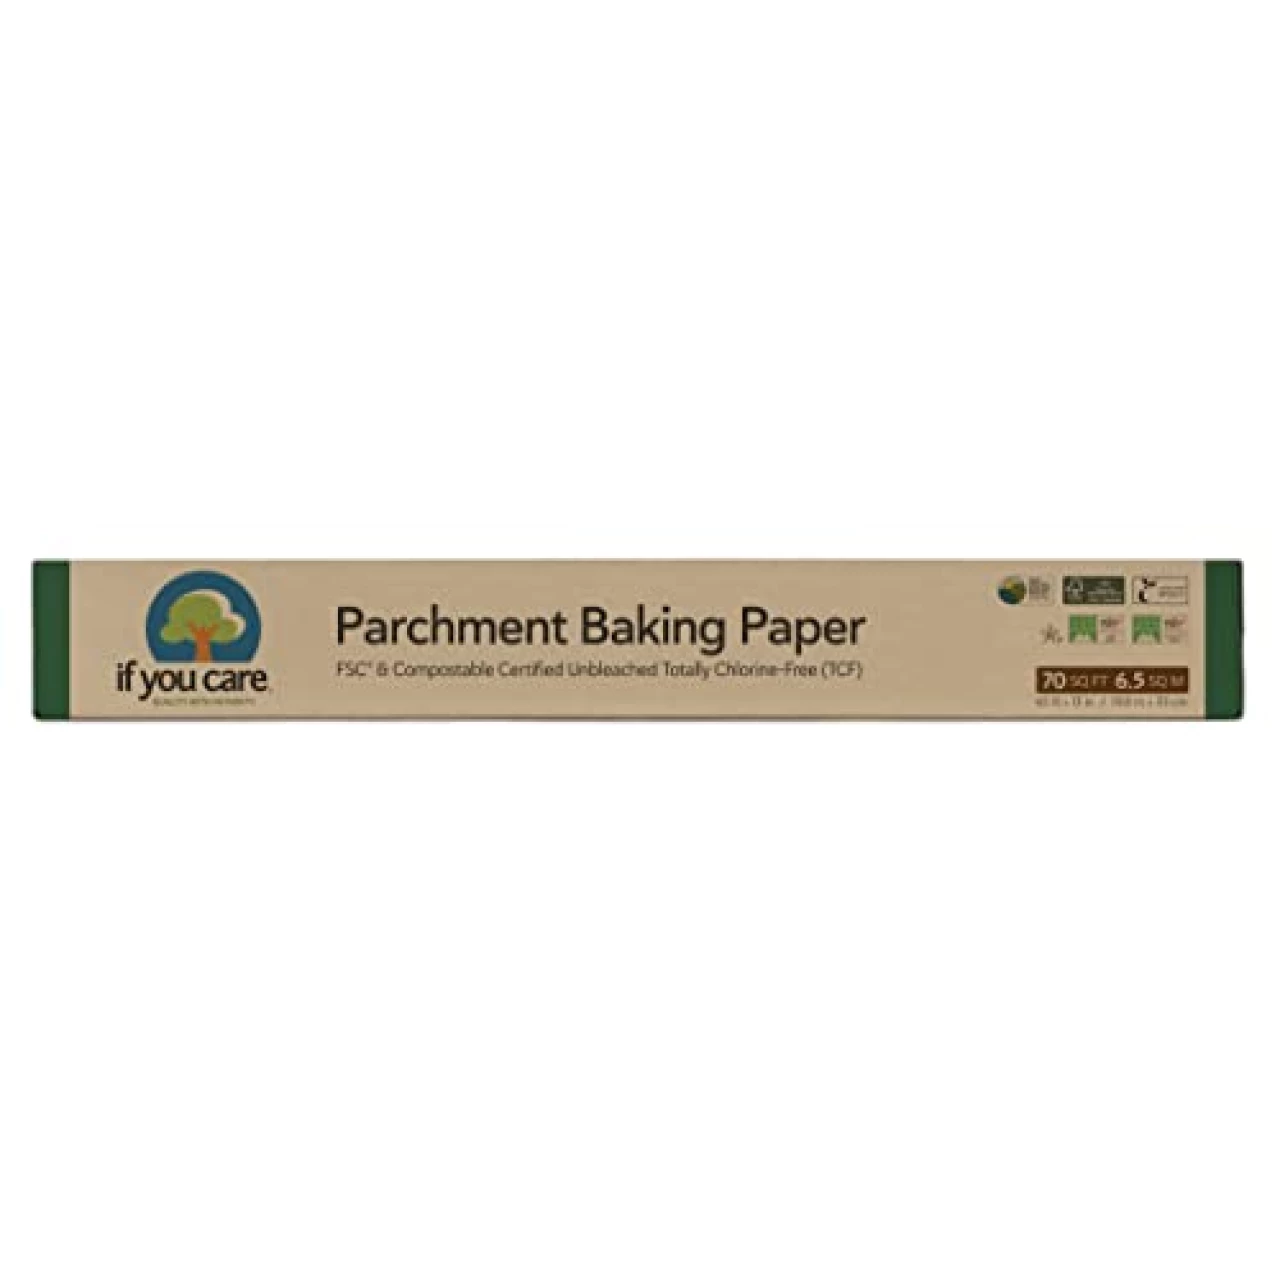 If You Care Parchment Baking Paper Sheets,Roll 70 Sq Ft Roll, Unbleached, Chlorine Free, Greaseproof, Silicone Coated, Standard Size, Fits 13 Inch Pans